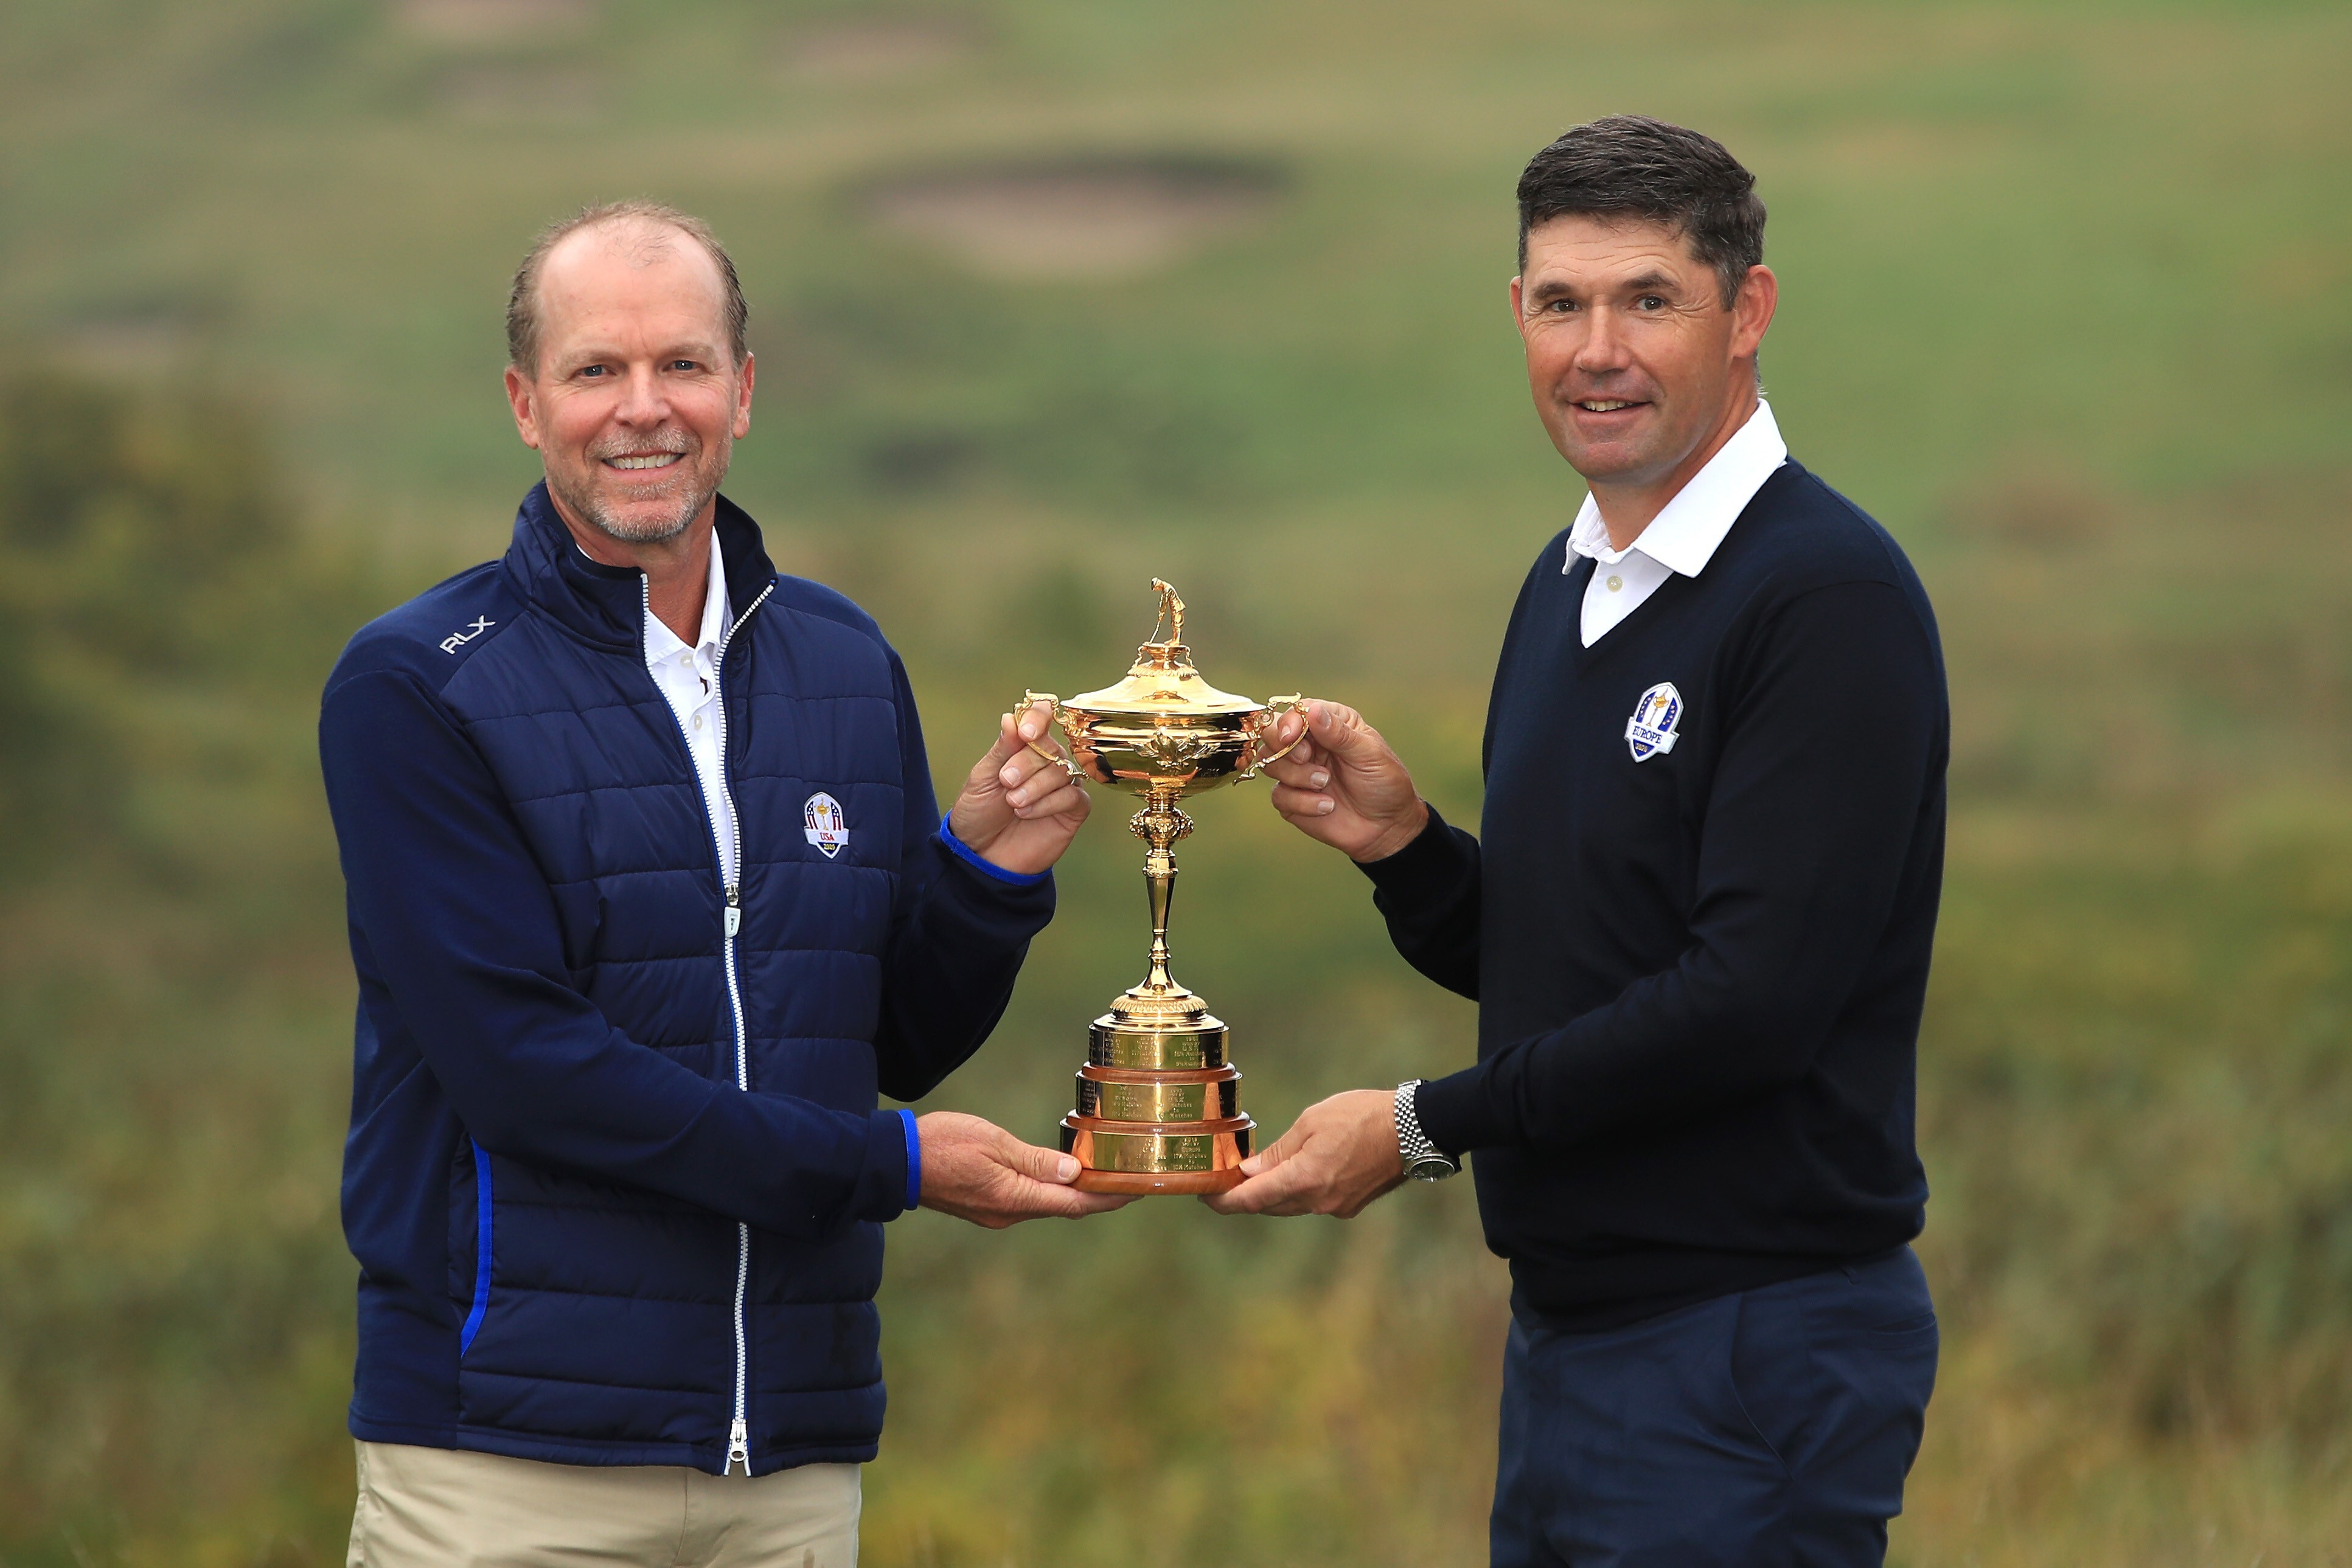 United States Captain Steve Stricker (left) says the Ryder Cup would be ‘a yawn’ without spectators. Photo: AFP